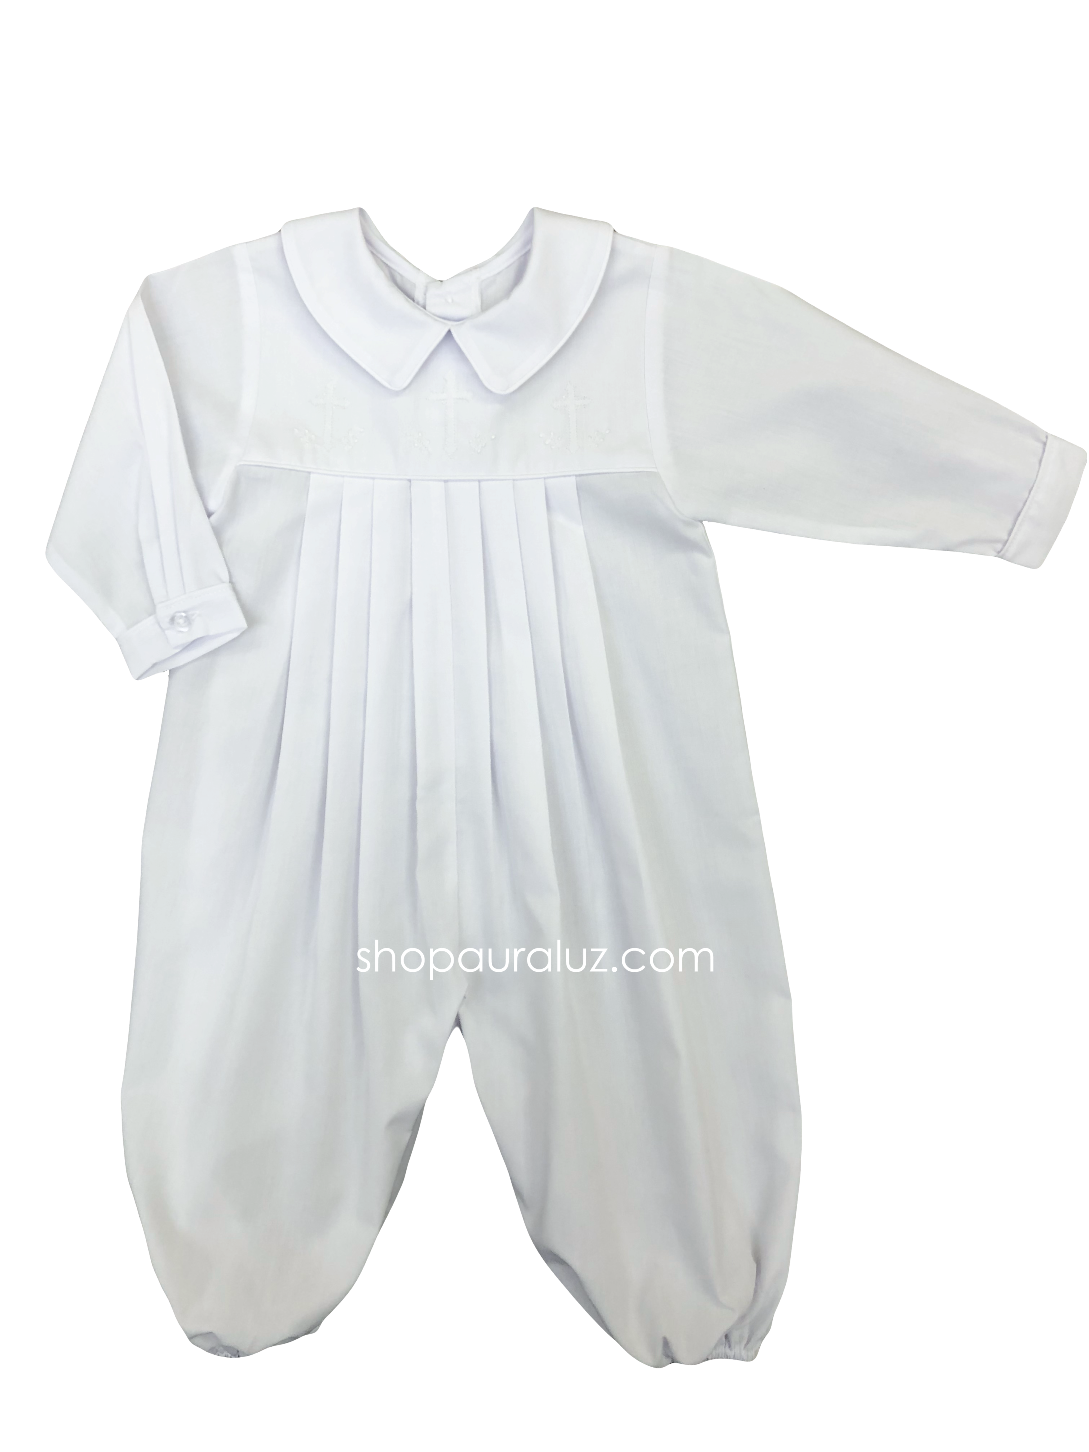 Auraluz Boy Longall, l/s...White with white trim and embroidered crosses